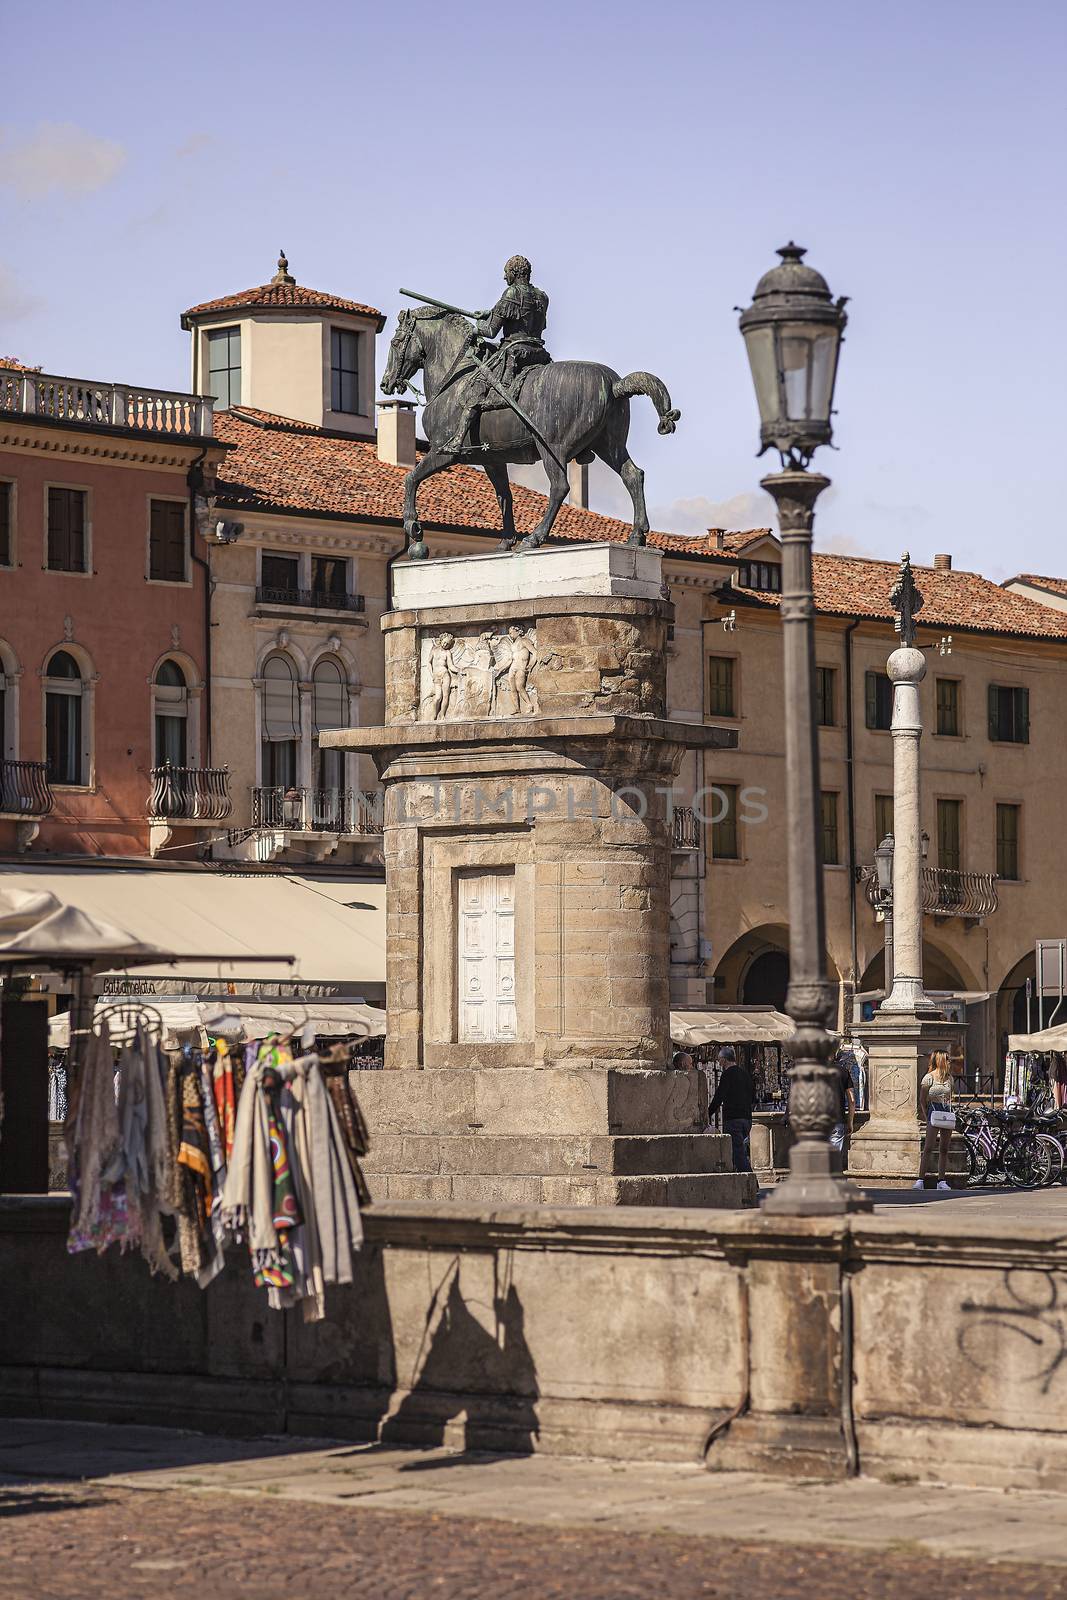 Horse statue in Padua, Italy by pippocarlot